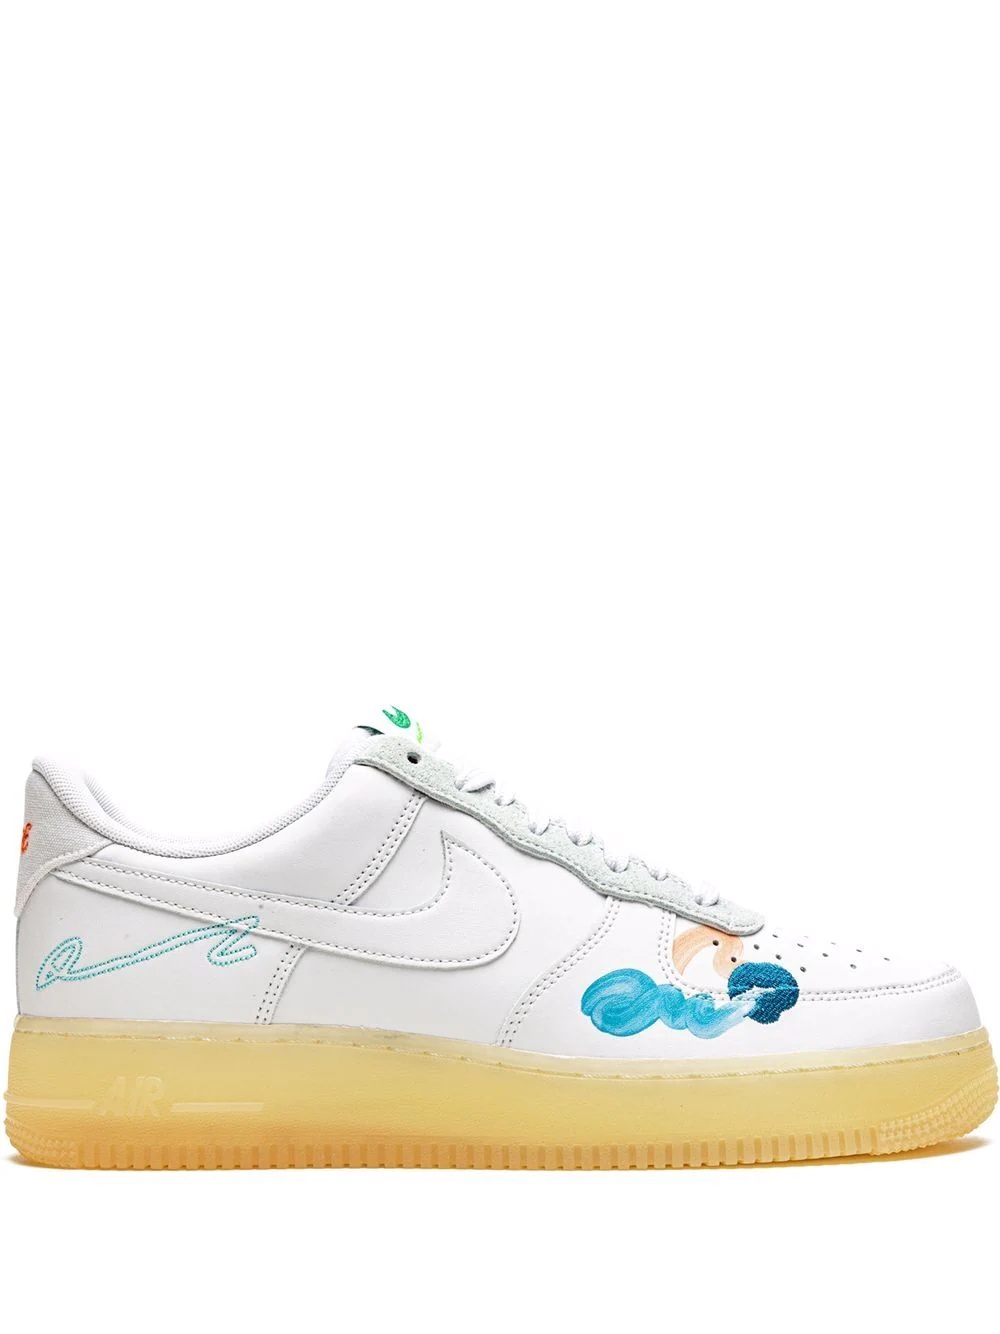 x Mayumi Yamase Air Force 1 Low Flyleather sneakers - 1